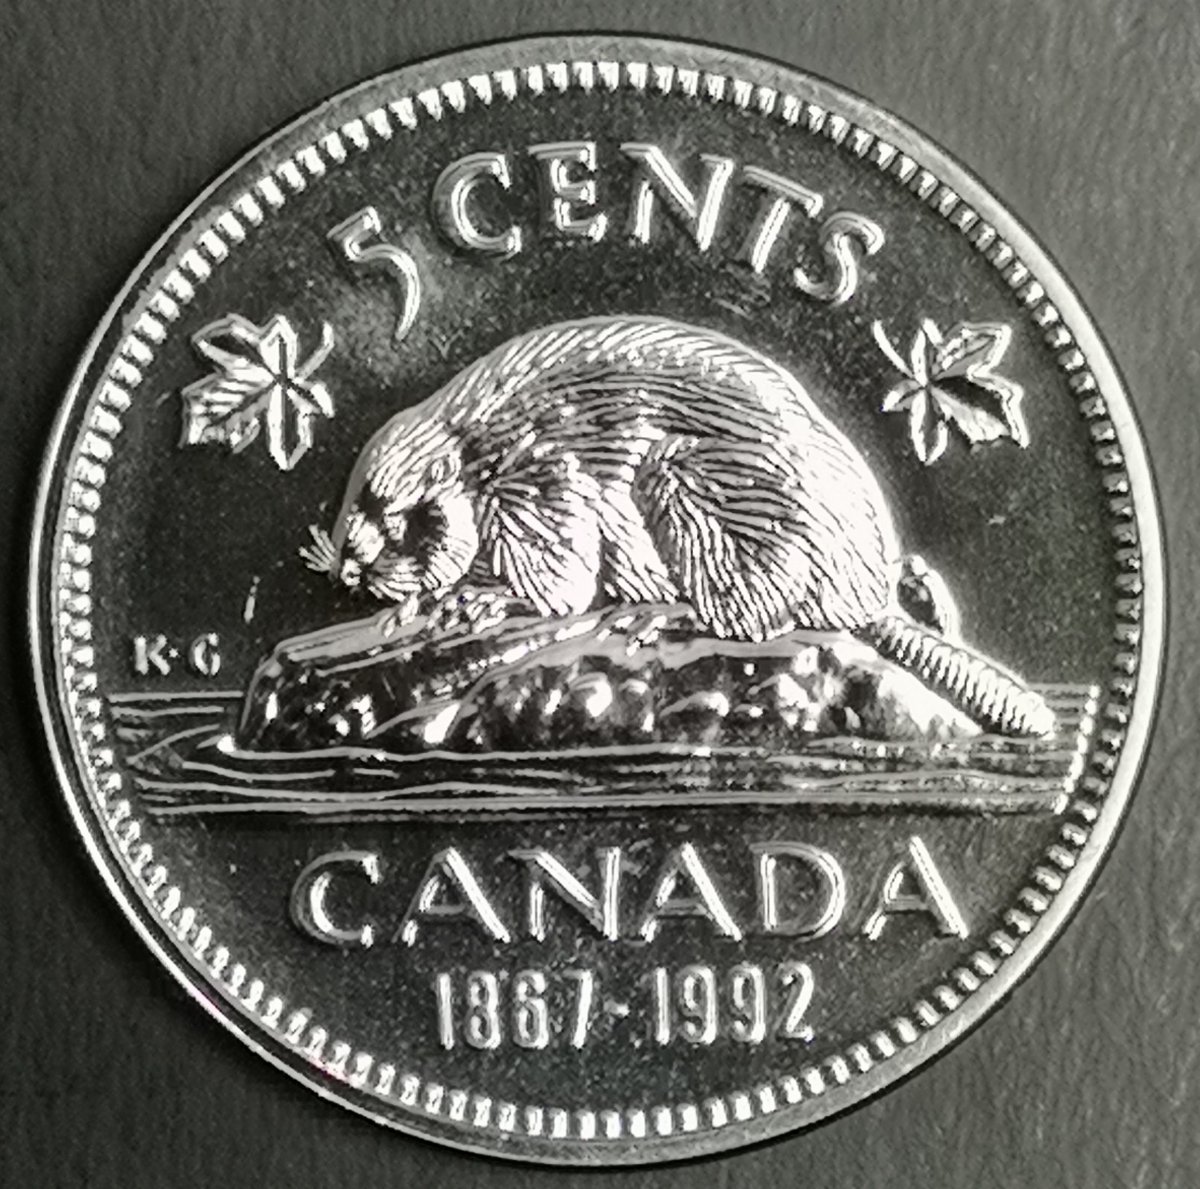 1992 Canadian Nickel Type 2 Re-Engraved Beaver | Coin Talk